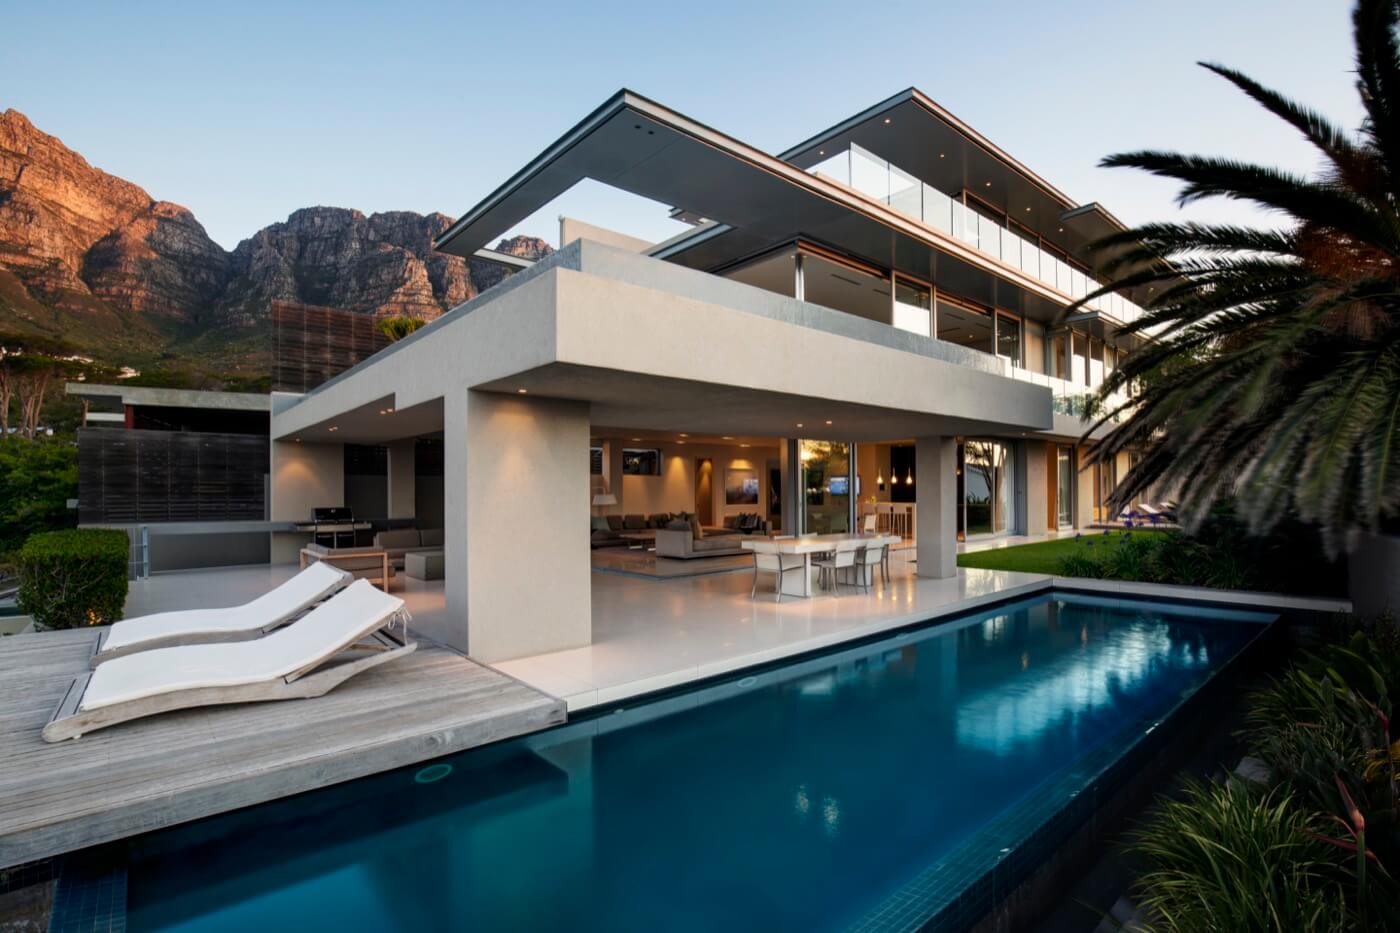 Photo 5 of The Crescent accommodation in Camps Bay, Cape Town with 6 bedrooms and 6.5 bathrooms